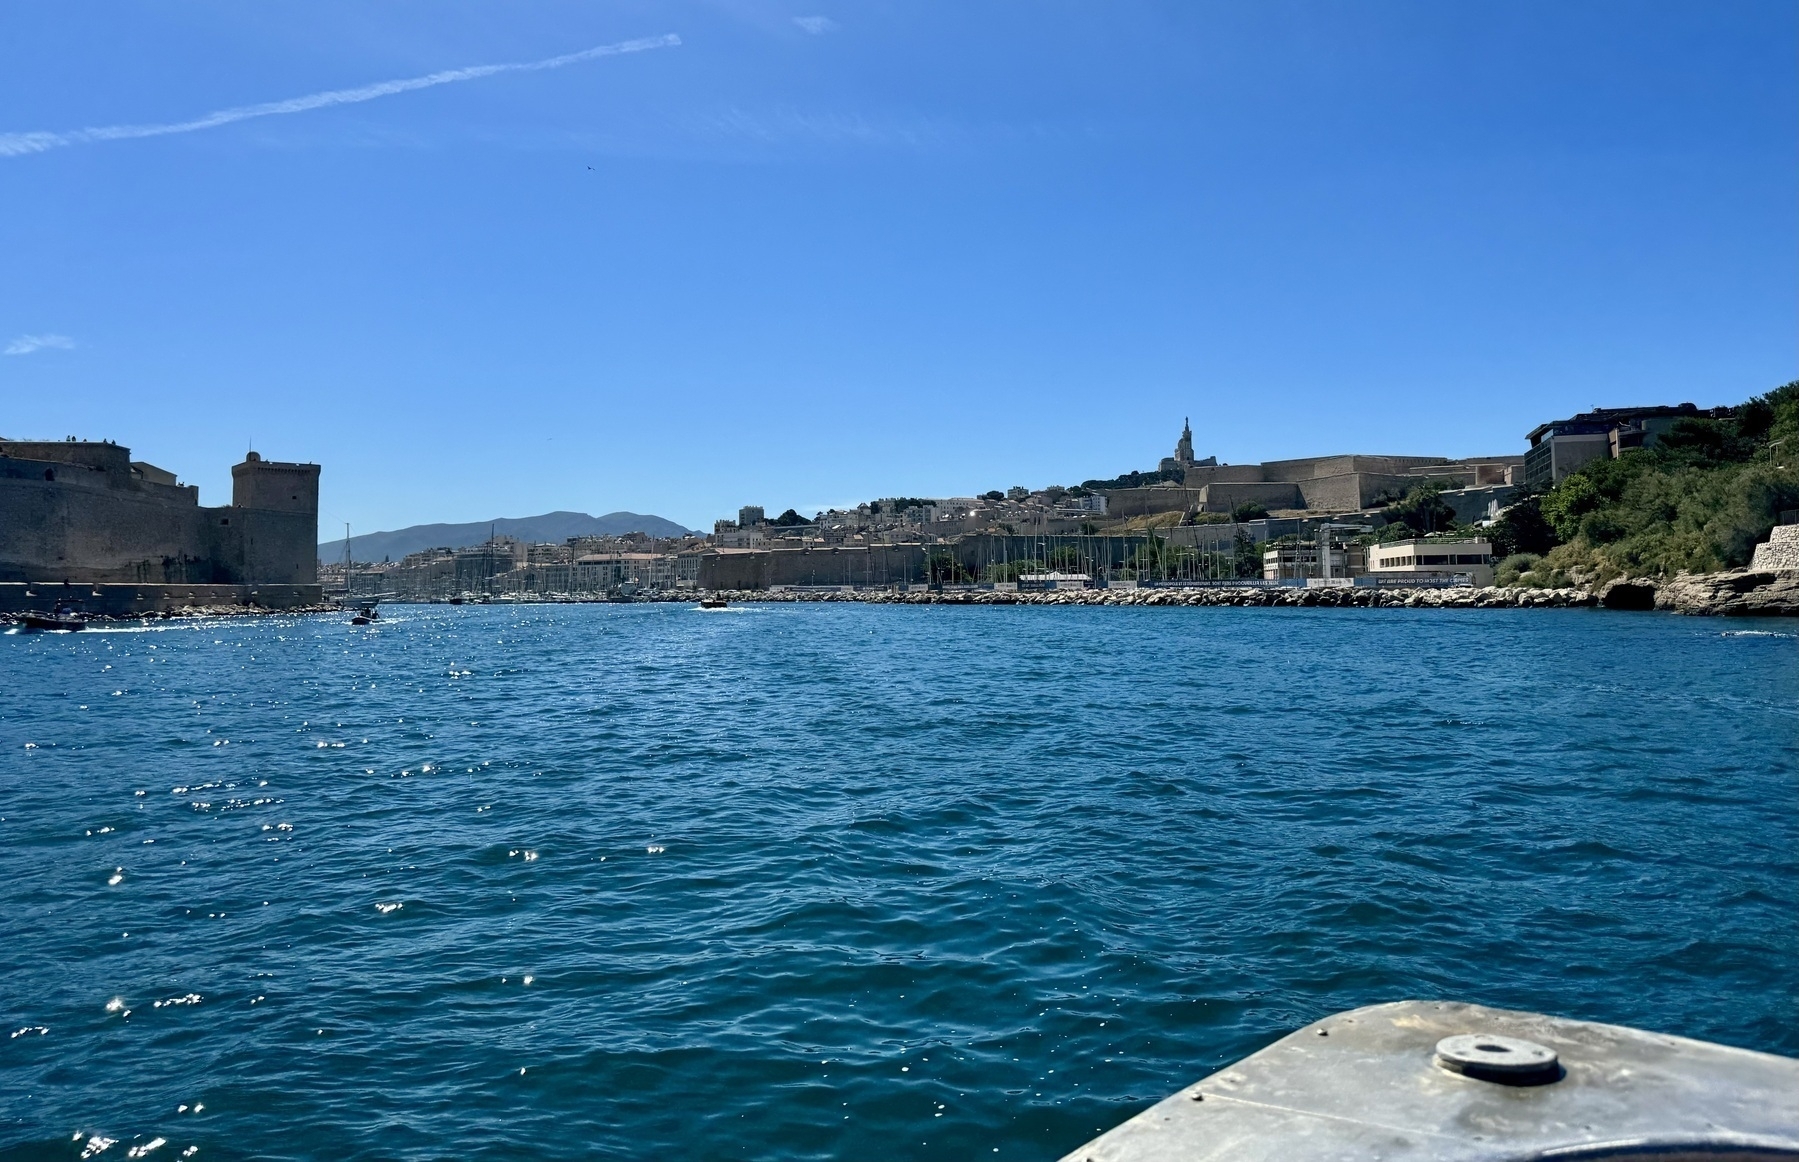 Coming in to Marseille’s old port under a bright blue sky.